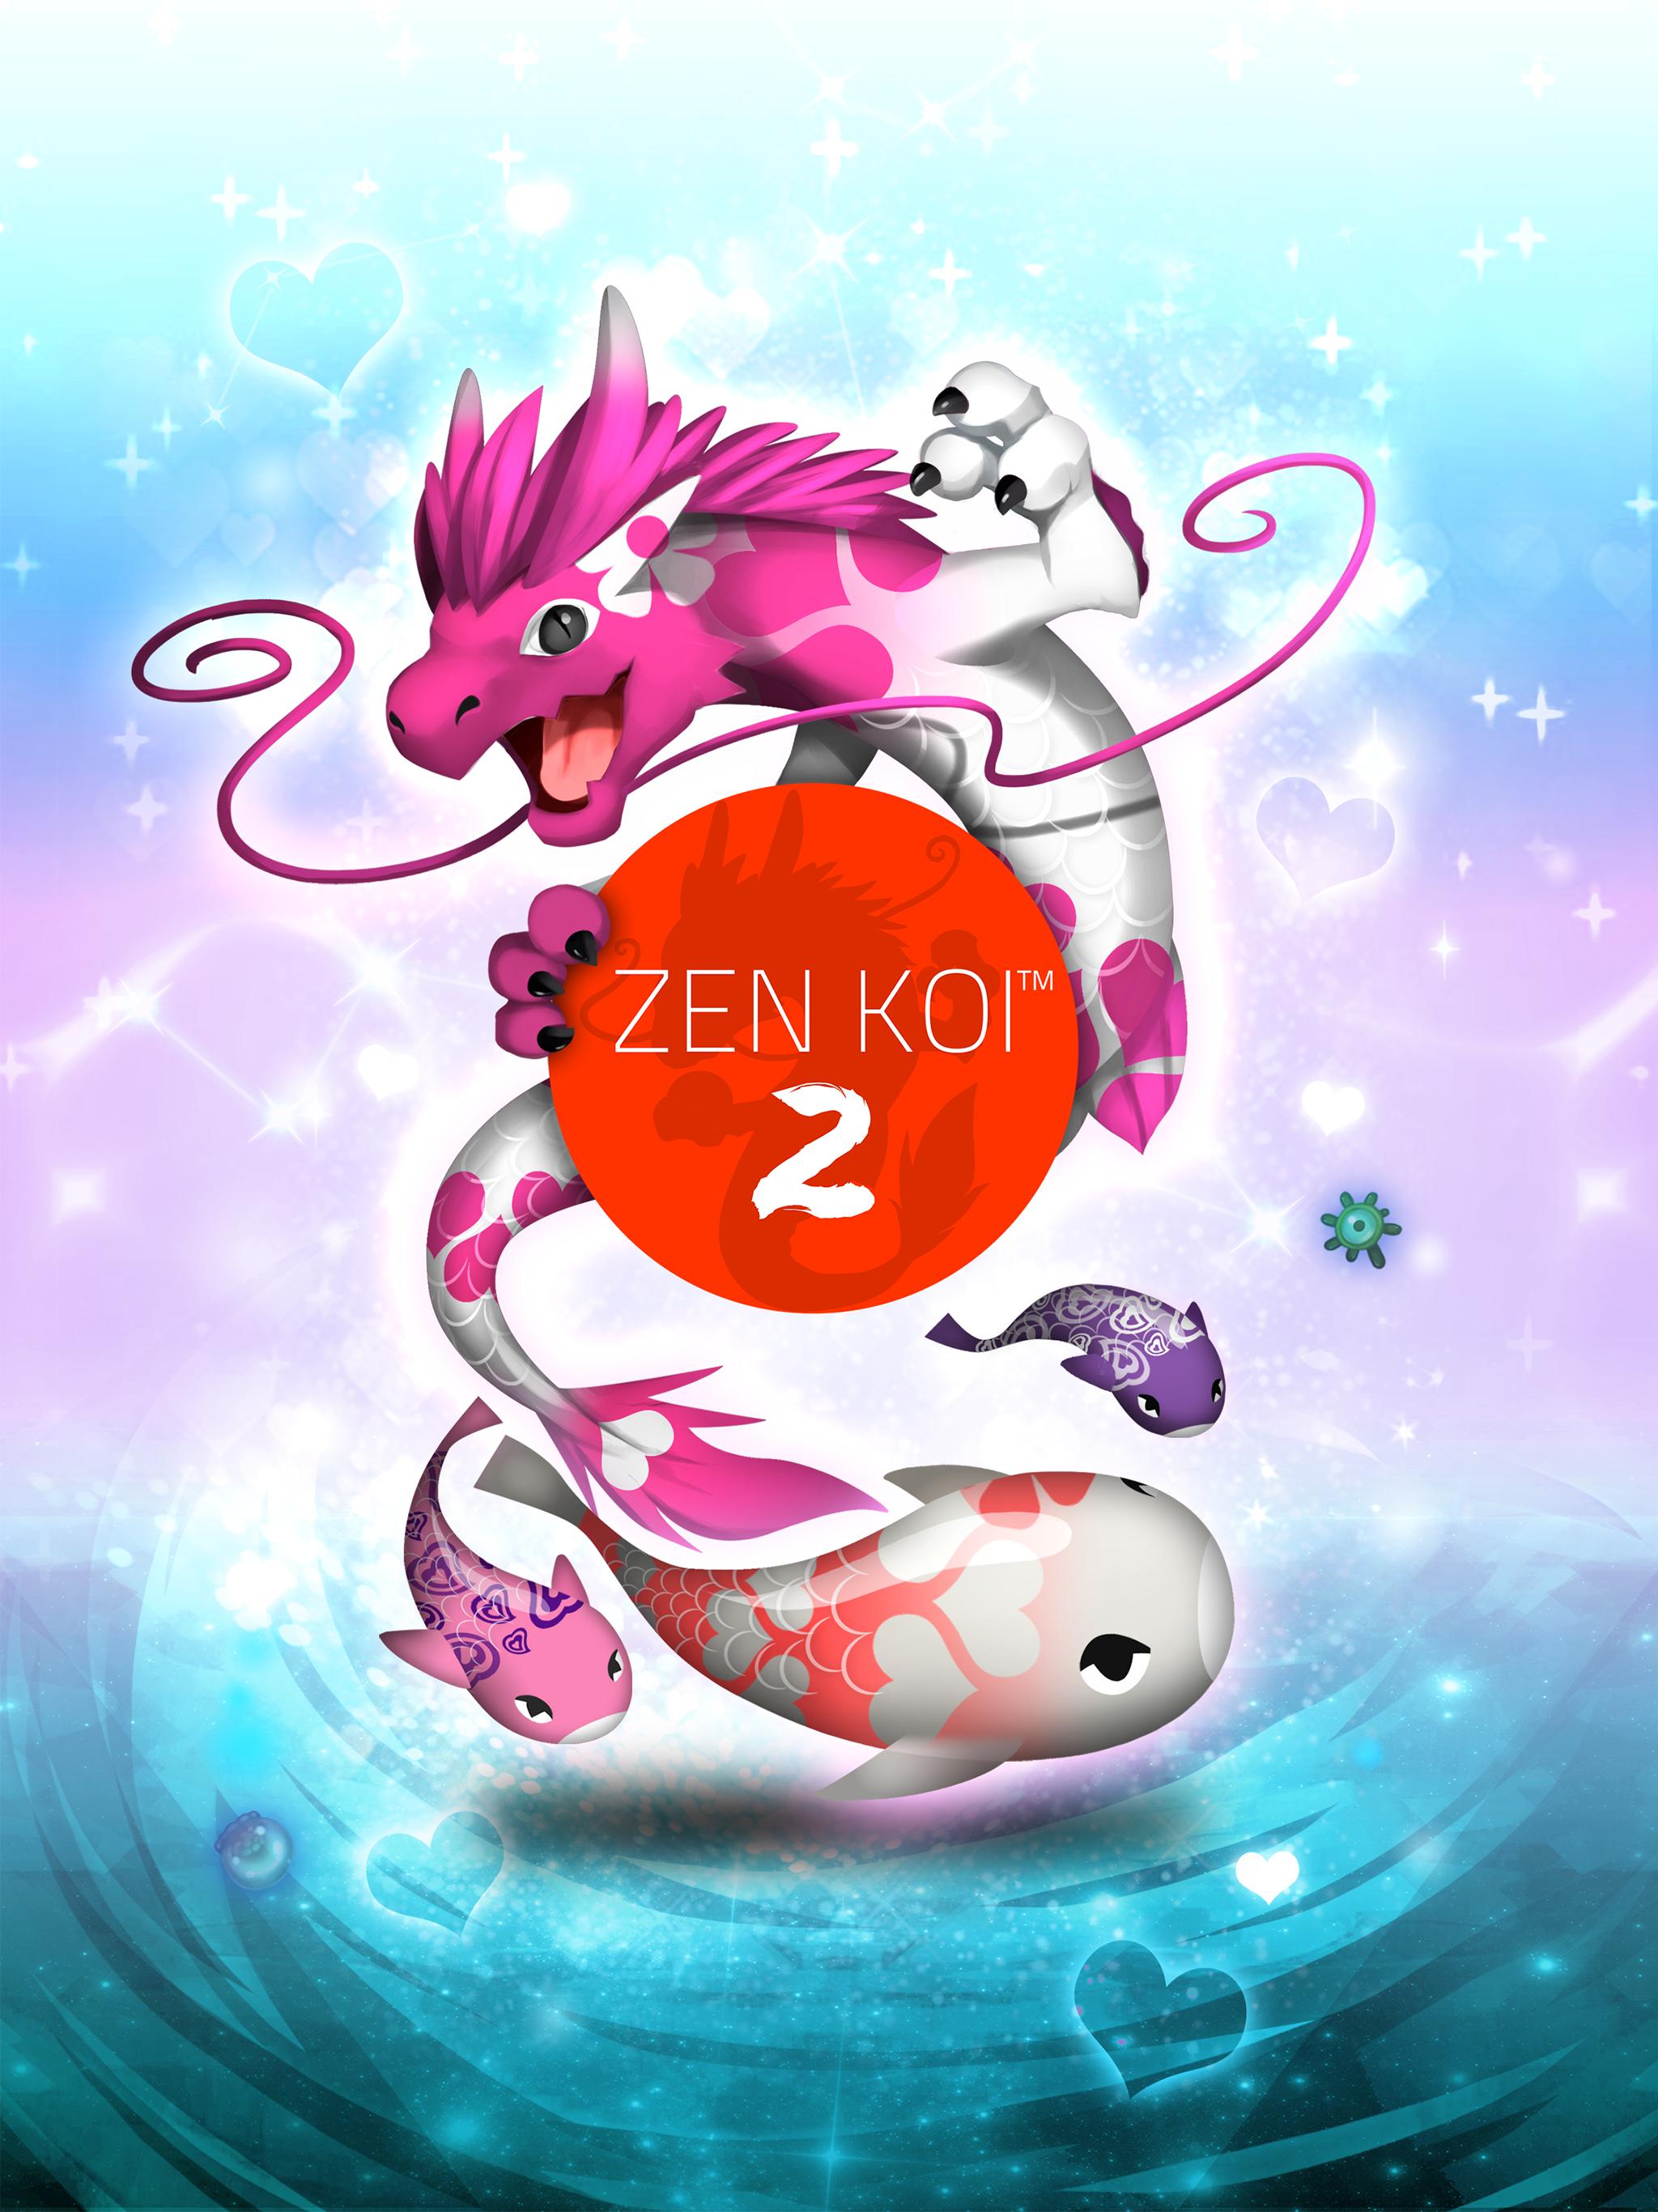 Zen Koi 2 for Android - APK Download